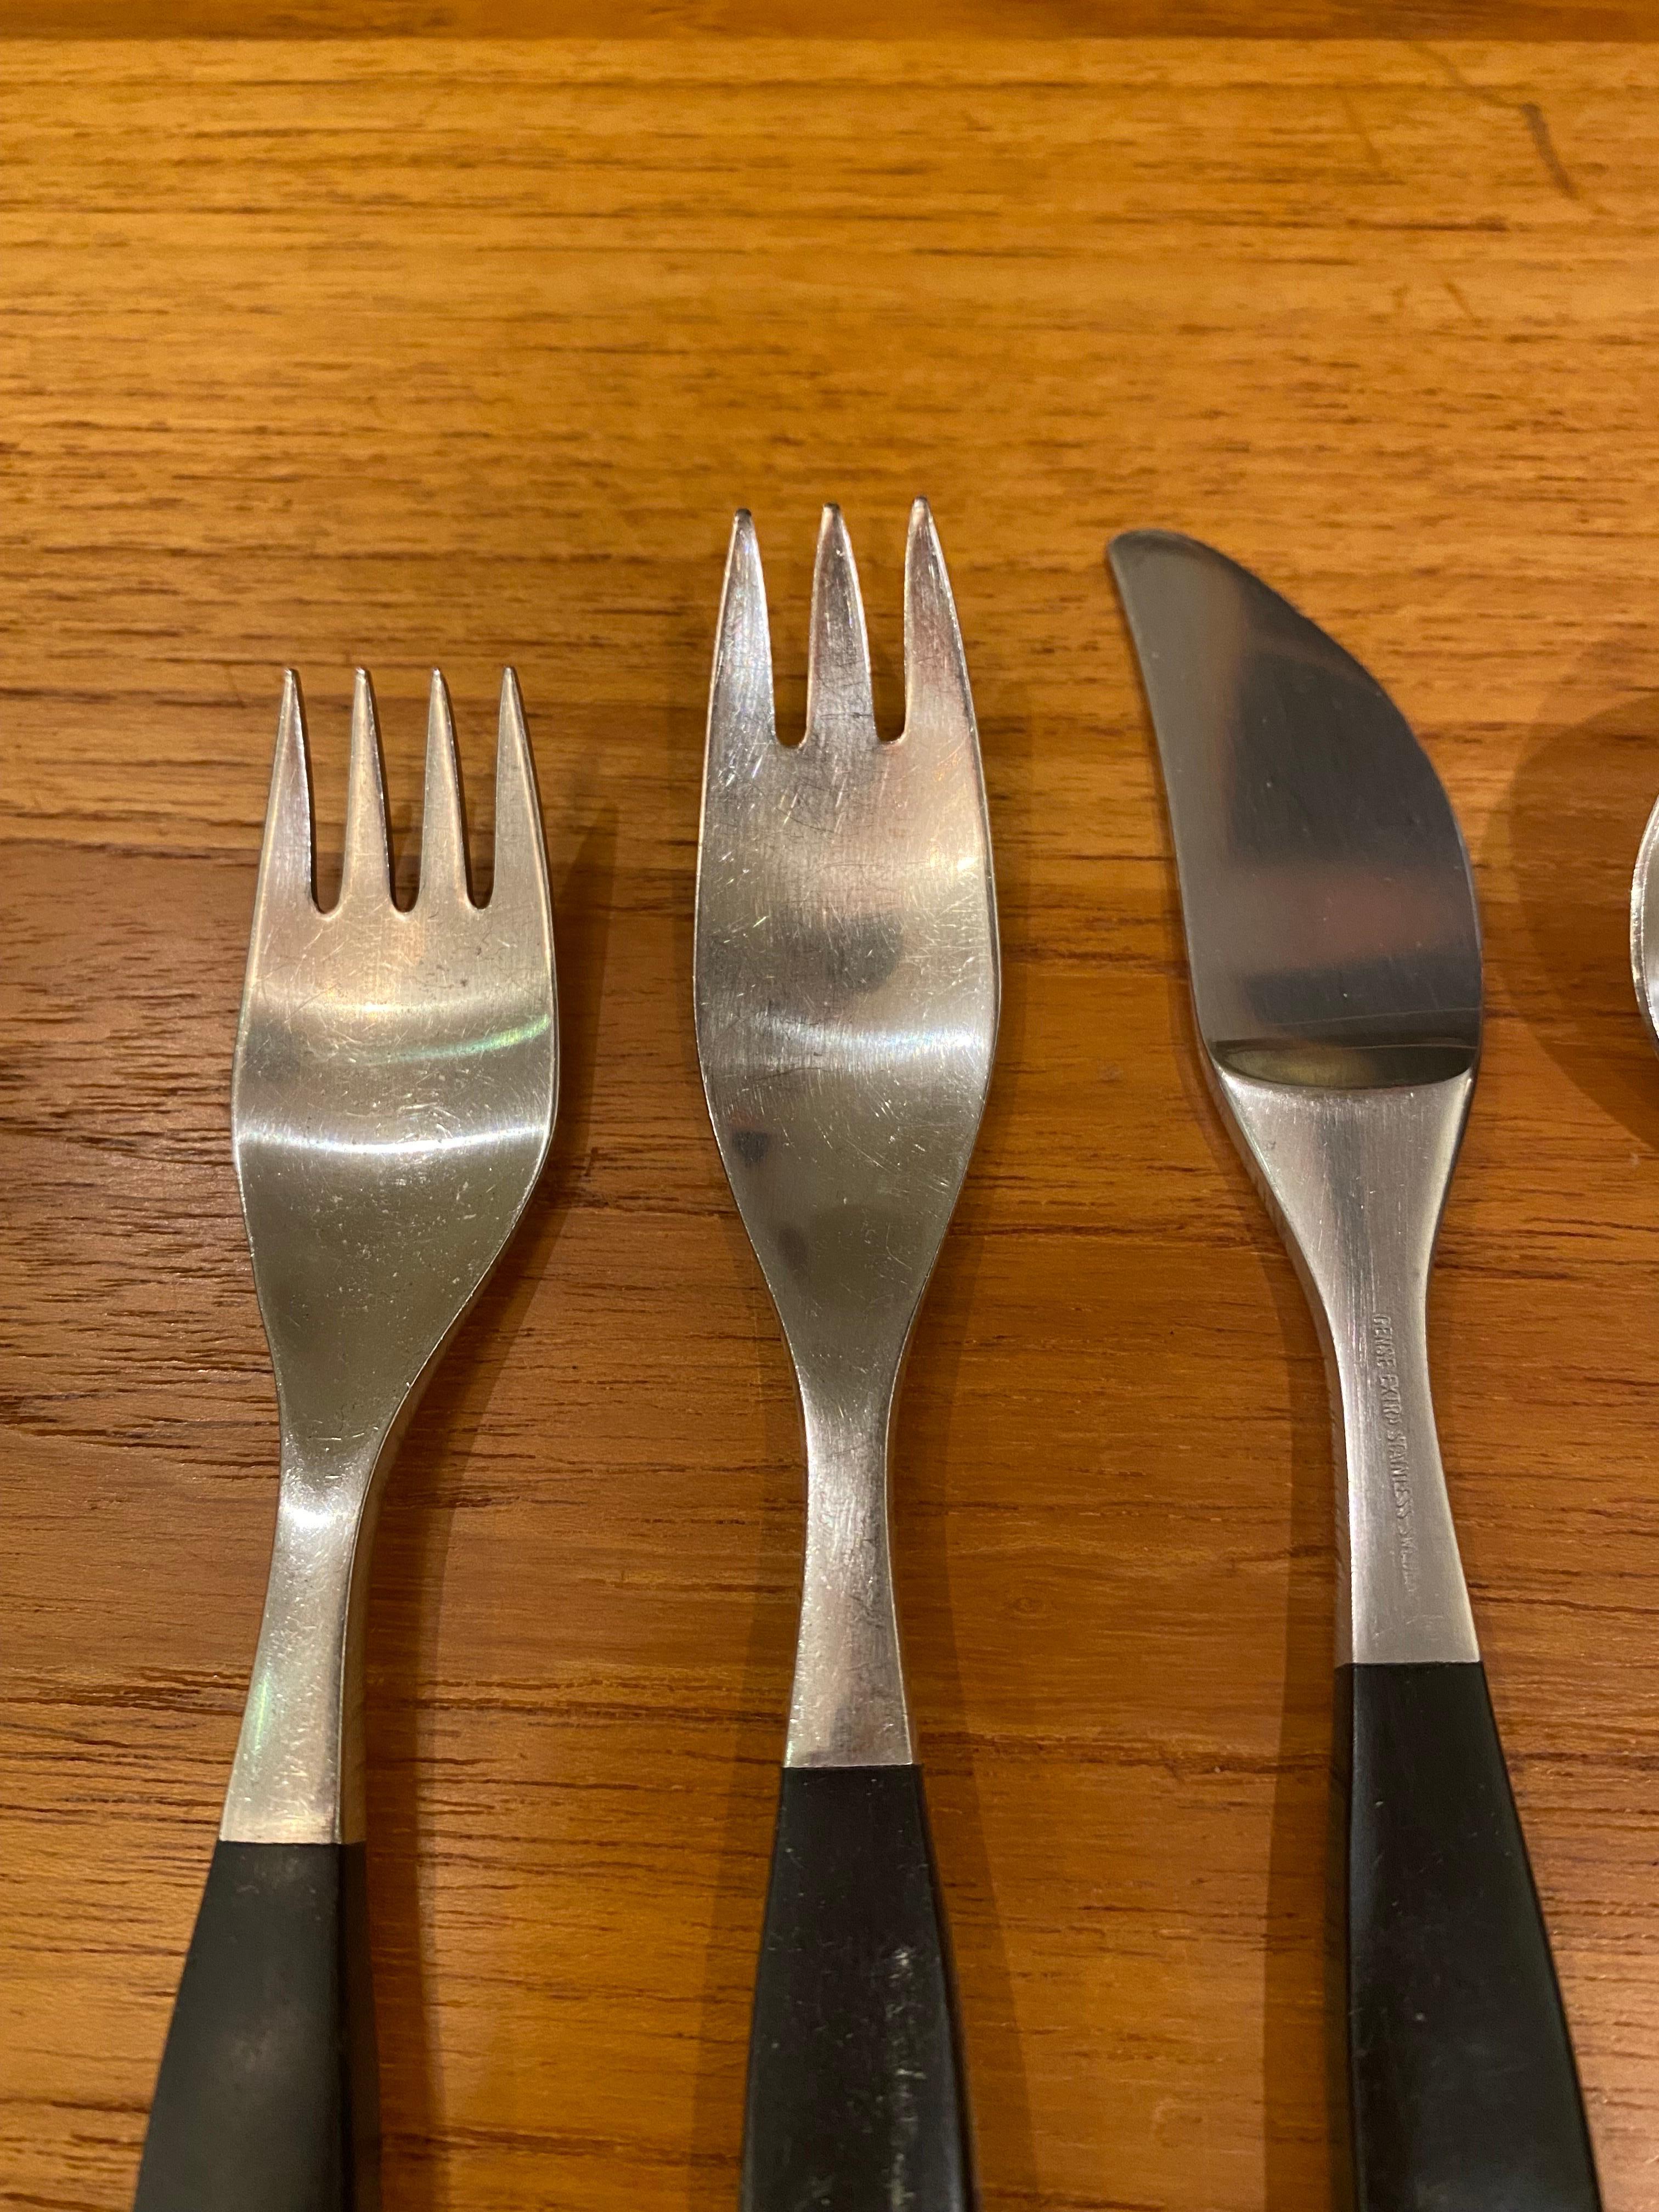 Gense Stainless Steel, complete Service for 12 plus 4 Serving pieces. Handles are a black Resin or Bakelite material that has the look of ebony. Overall in good shape, shows typical wear and use.